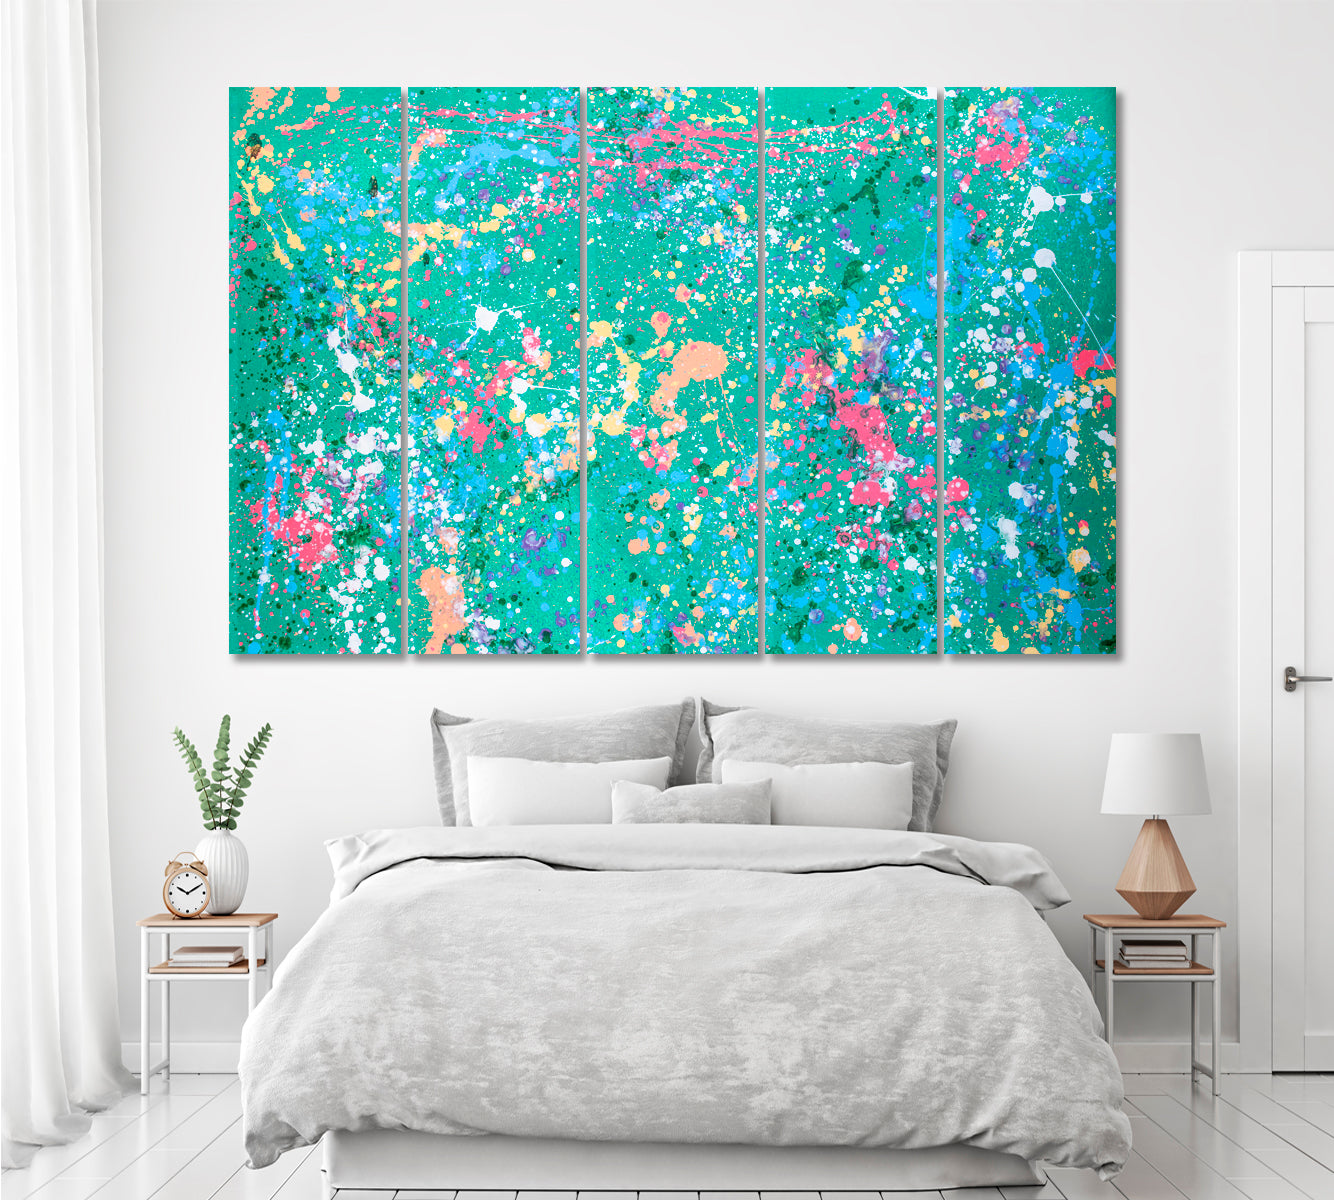 Abstract Colorful Splatter Ink Canvas Print ArtLexy 5 Panels 36"x24" inches 